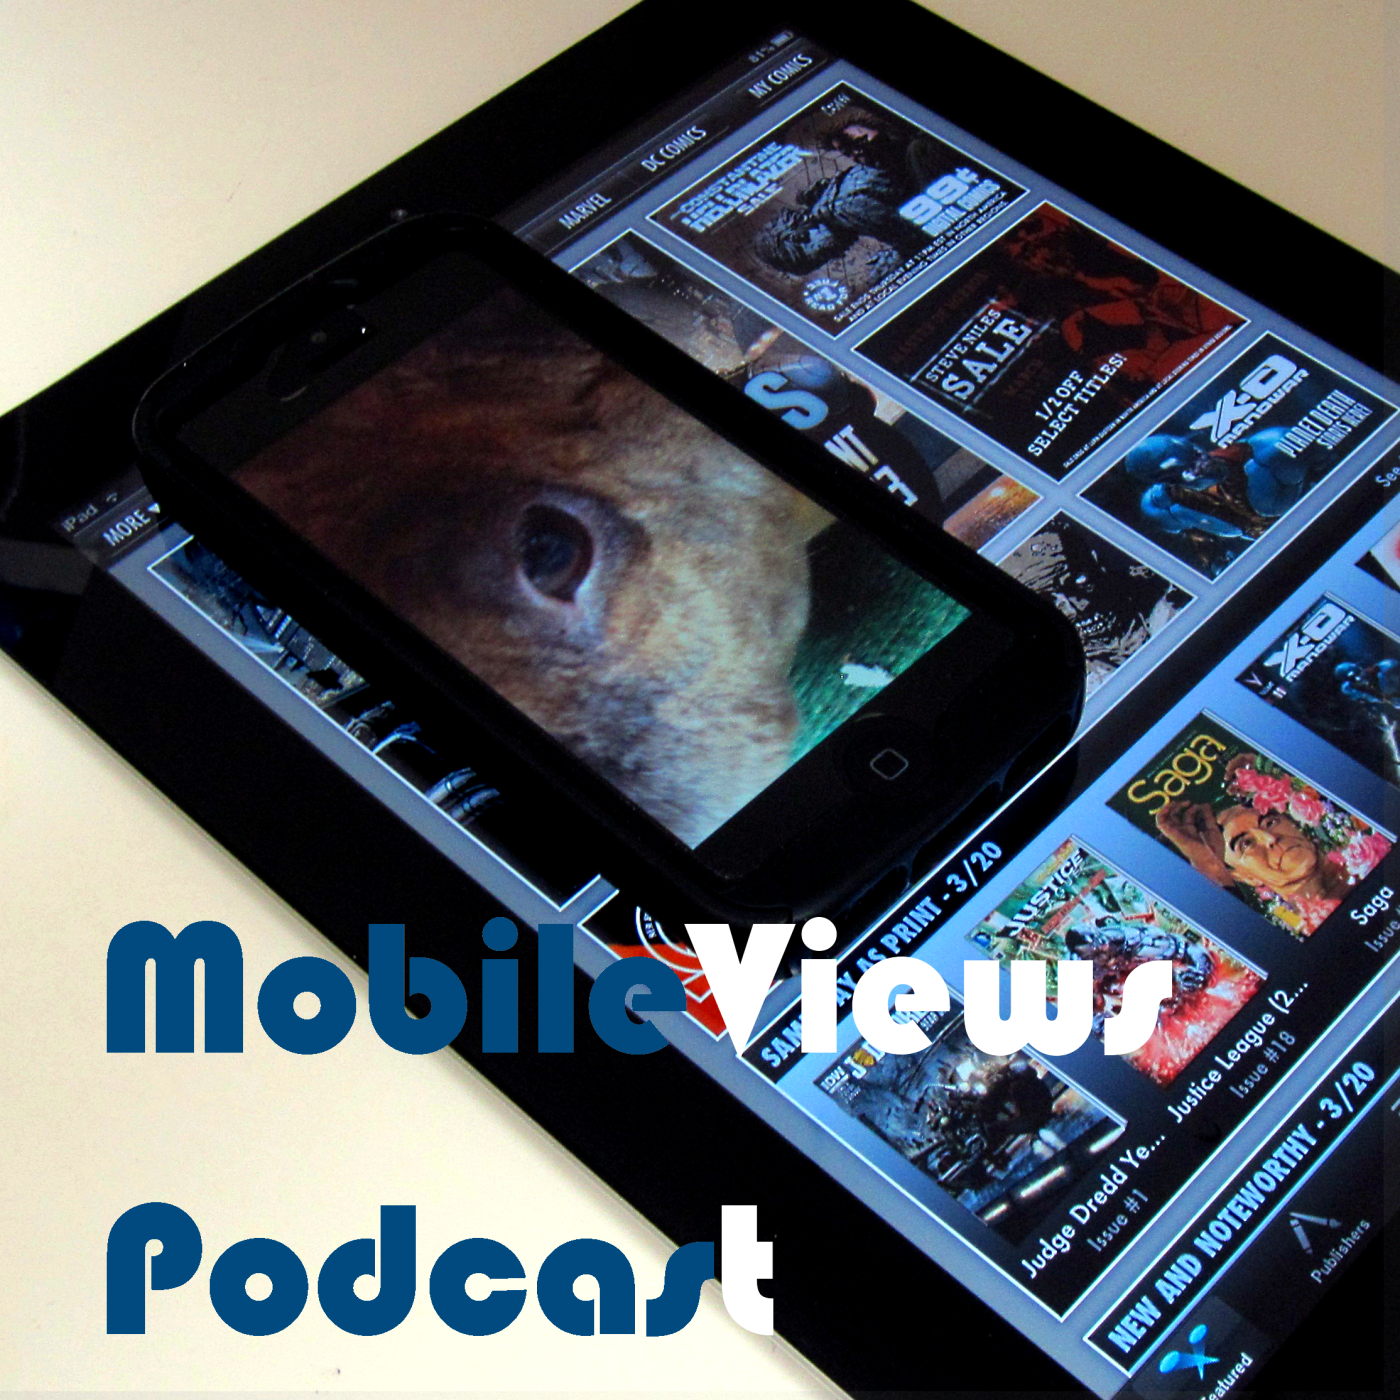 MobileViews Podcast 80: Amazon phone, Windows 8.1 Update, HeartBleed, Apps of the Week